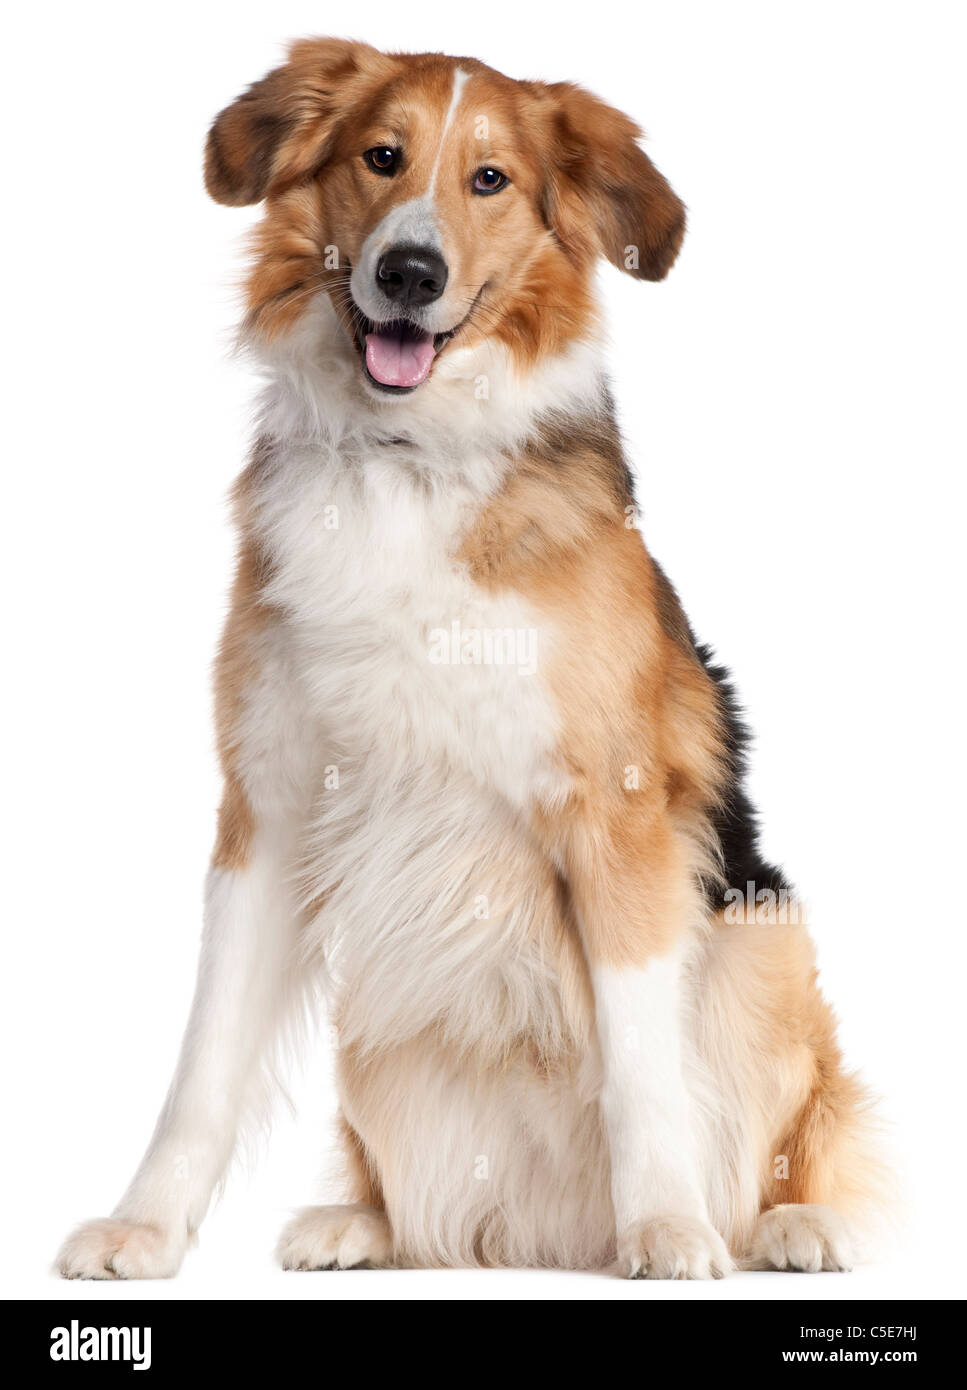 Mixed-breed dog, 2 and a half years old, sitting in front of white background Stock Photo